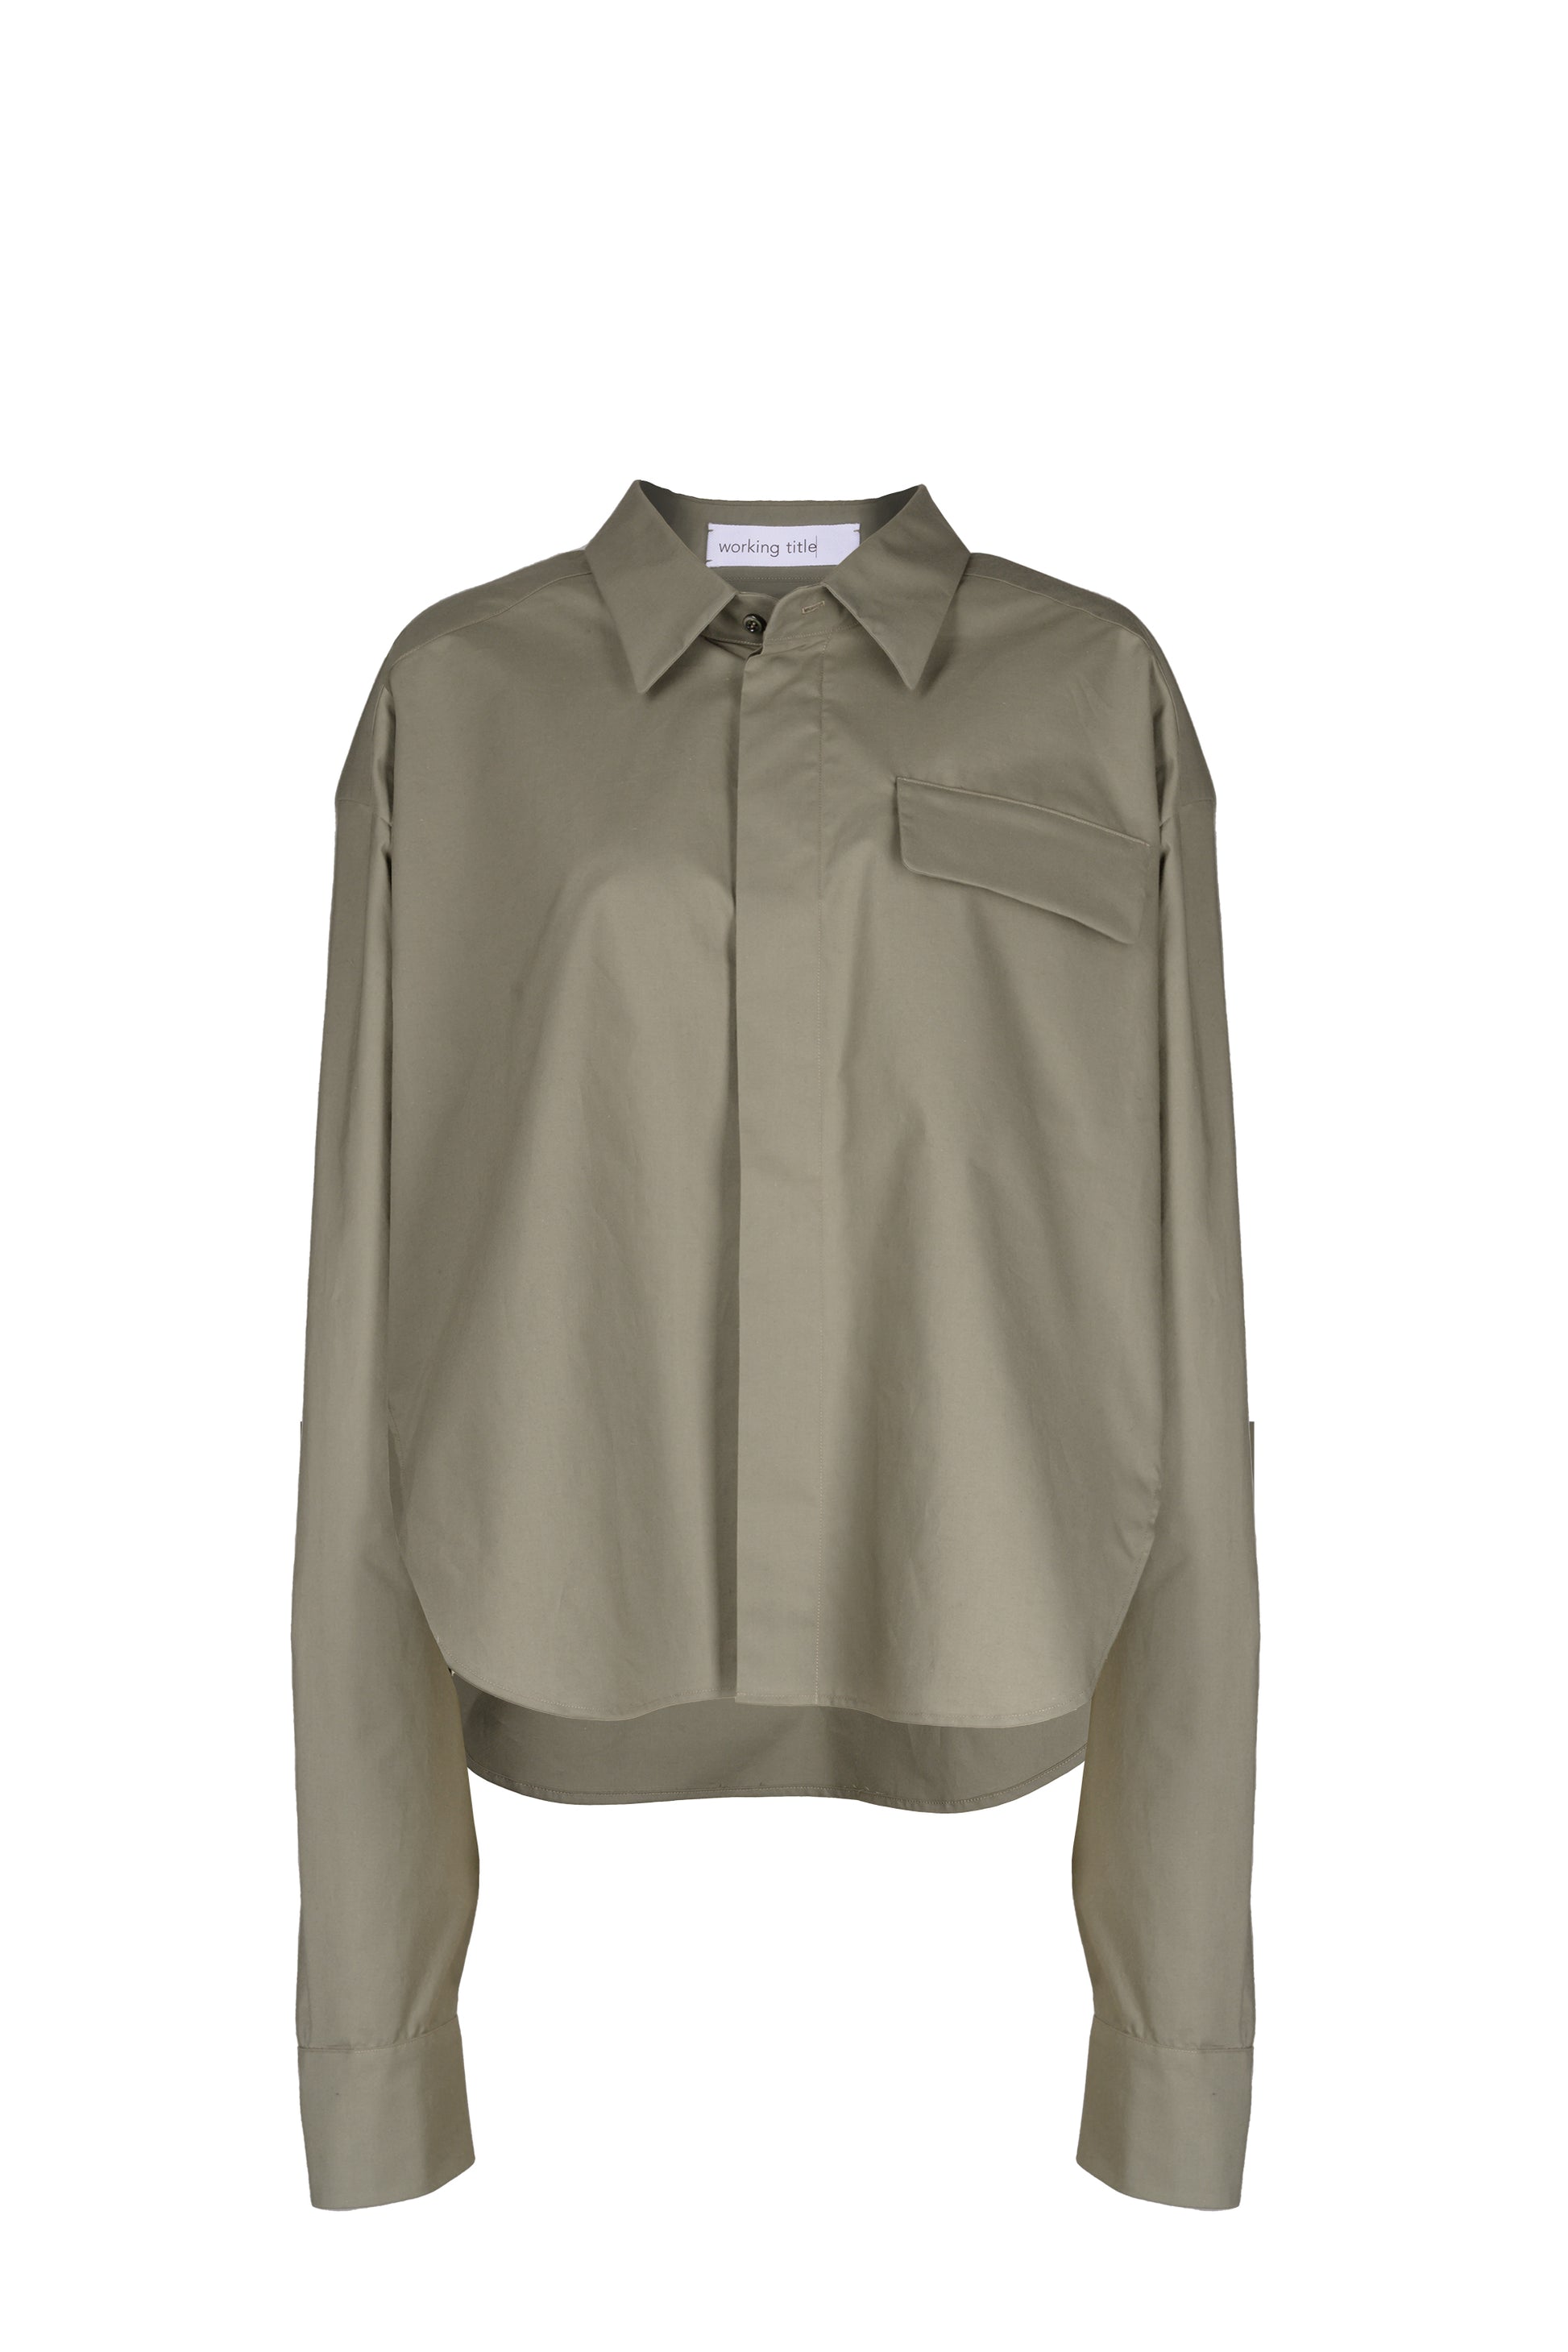 Olive green oversized shirt with classic collar and hidden button placket, made from FSC-certified cotton, styled for a casual to semi-formal look.